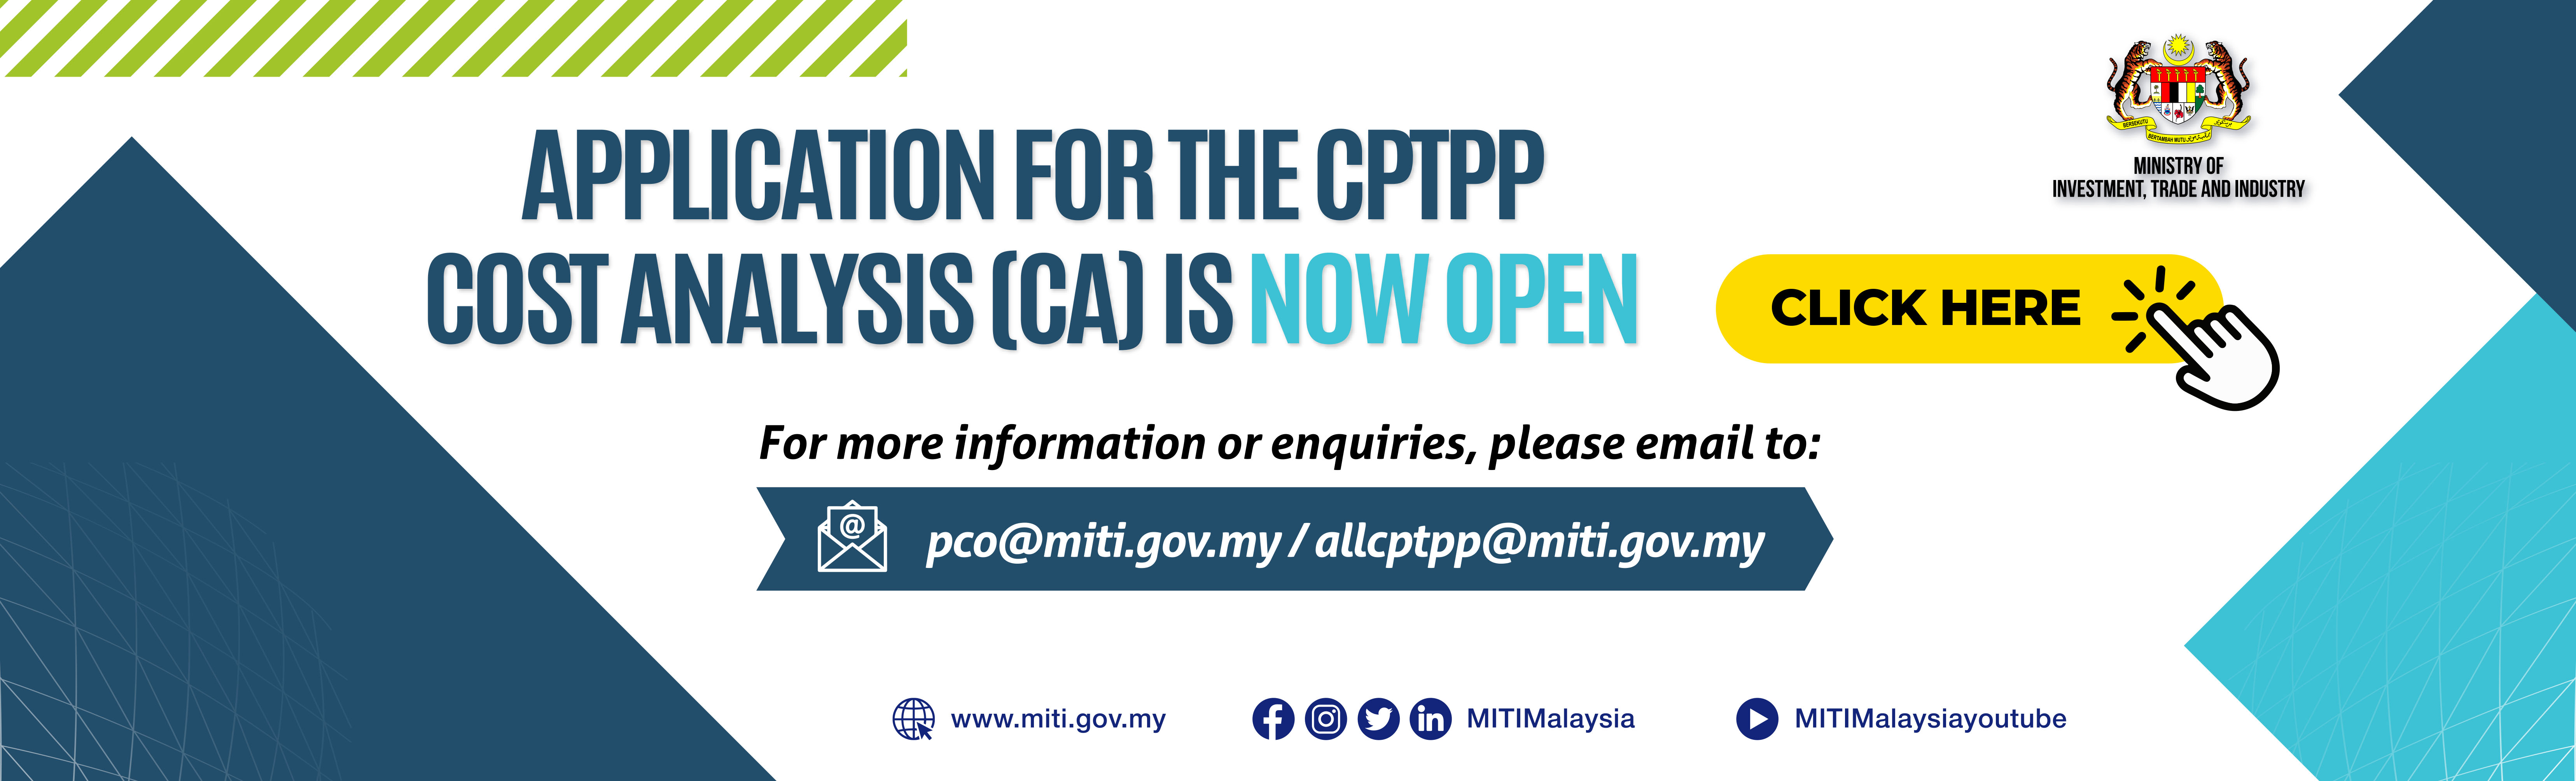 APPLICATION FOR THE CPTPP COST ANALYSIS (CA) IS NOW OPEN